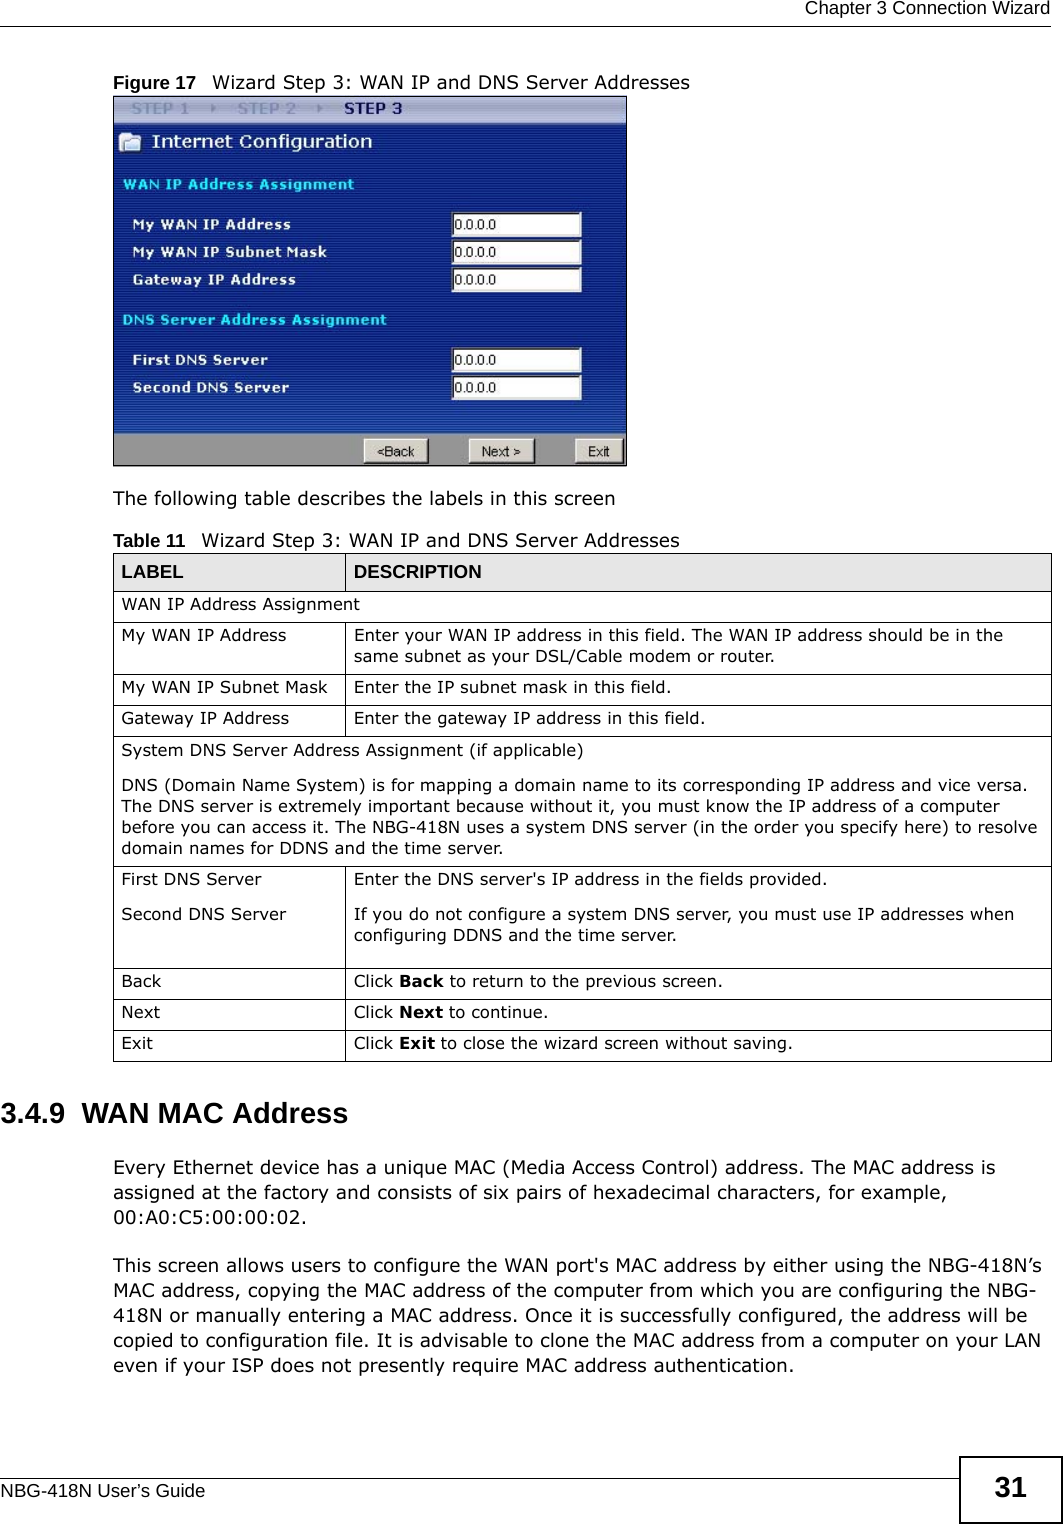  Chapter 3 Connection WizardNBG-418N User’s Guide 31Figure 17   Wizard Step 3: WAN IP and DNS Server AddressesThe following table describes the labels in this screen3.4.9  WAN MAC AddressEvery Ethernet device has a unique MAC (Media Access Control) address. The MAC address is assigned at the factory and consists of six pairs of hexadecimal characters, for example, 00:A0:C5:00:00:02.This screen allows users to configure the WAN port&apos;s MAC address by either using the NBG-418N’s MAC address, copying the MAC address of the computer from which you are configuring the NBG-418N or manually entering a MAC address. Once it is successfully configured, the address will be copied to configuration file. It is advisable to clone the MAC address from a computer on your LAN even if your ISP does not presently require MAC address authentication.Table 11   Wizard Step 3: WAN IP and DNS Server AddressesLABEL DESCRIPTIONWAN IP Address Assignment My WAN IP Address Enter your WAN IP address in this field. The WAN IP address should be in the same subnet as your DSL/Cable modem or router.My WAN IP Subnet Mask Enter the IP subnet mask in this field.Gateway IP Address  Enter the gateway IP address in this field. System DNS Server Address Assignment (if applicable)DNS (Domain Name System) is for mapping a domain name to its corresponding IP address and vice versa. The DNS server is extremely important because without it, you must know the IP address of a computer before you can access it. The NBG-418N uses a system DNS server (in the order you specify here) to resolve domain names for DDNS and the time server.First DNS ServerSecond DNS Server Enter the DNS server&apos;s IP address in the fields provided.If you do not configure a system DNS server, you must use IP addresses when configuring DDNS and the time server.Back Click Back to return to the previous screen.Next Click Next to continue. Exit Click Exit to close the wizard screen without saving.